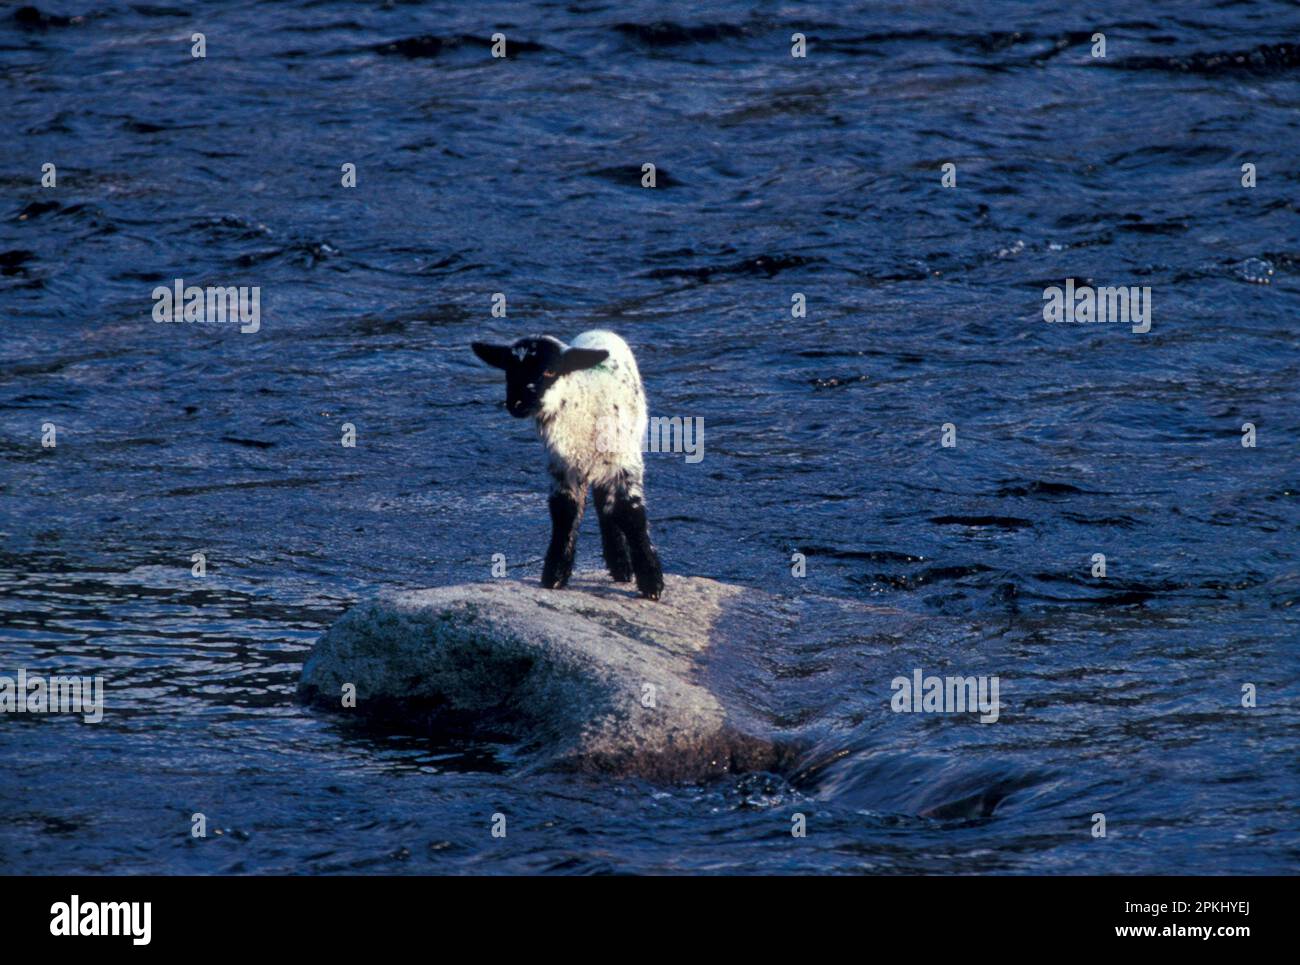 Sheep, General Close-up of a lamb abandoned on a boulder in the Scottish river Stock Photo